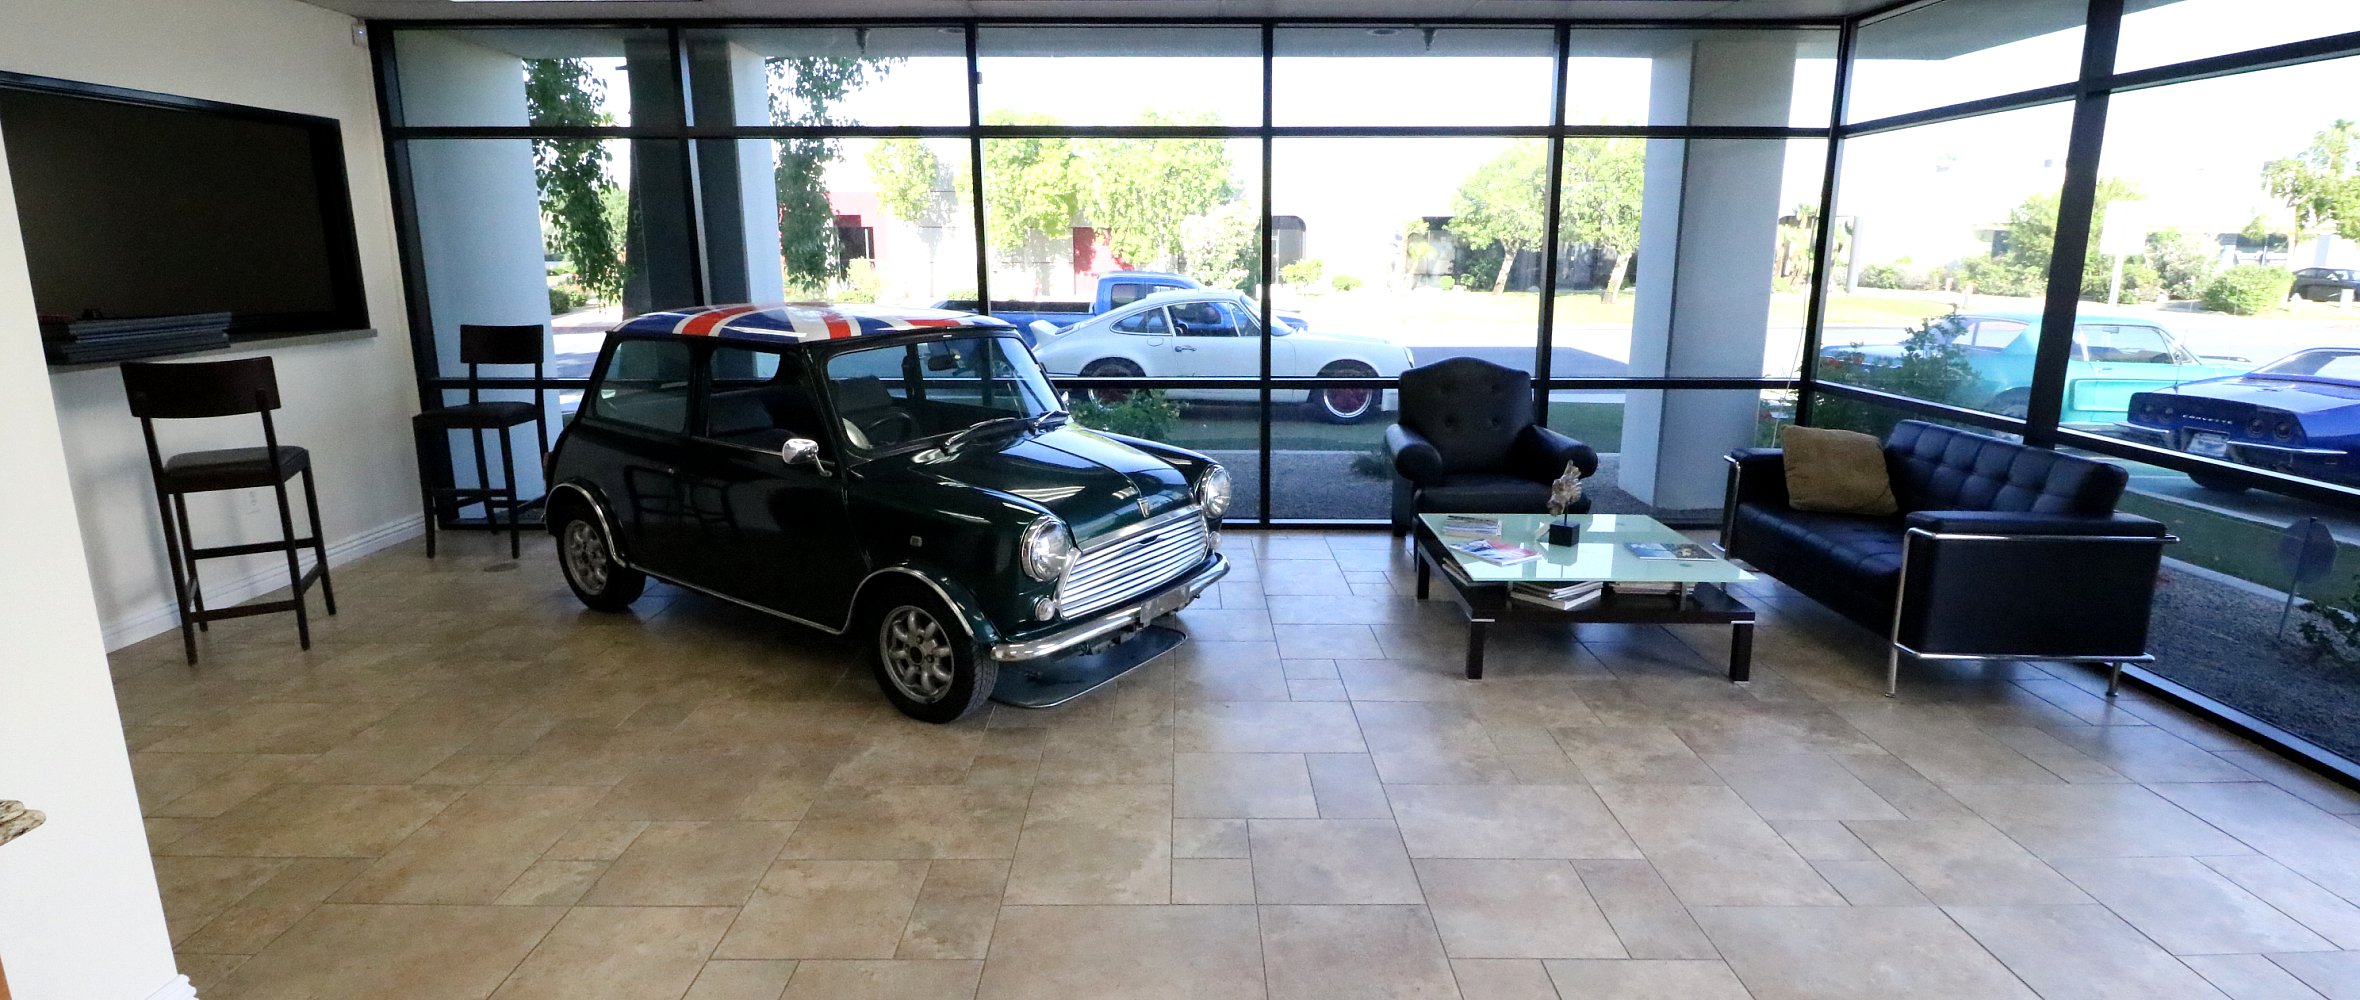 Desert Private Collection Motorsports - Palm Springs Classic car buyer